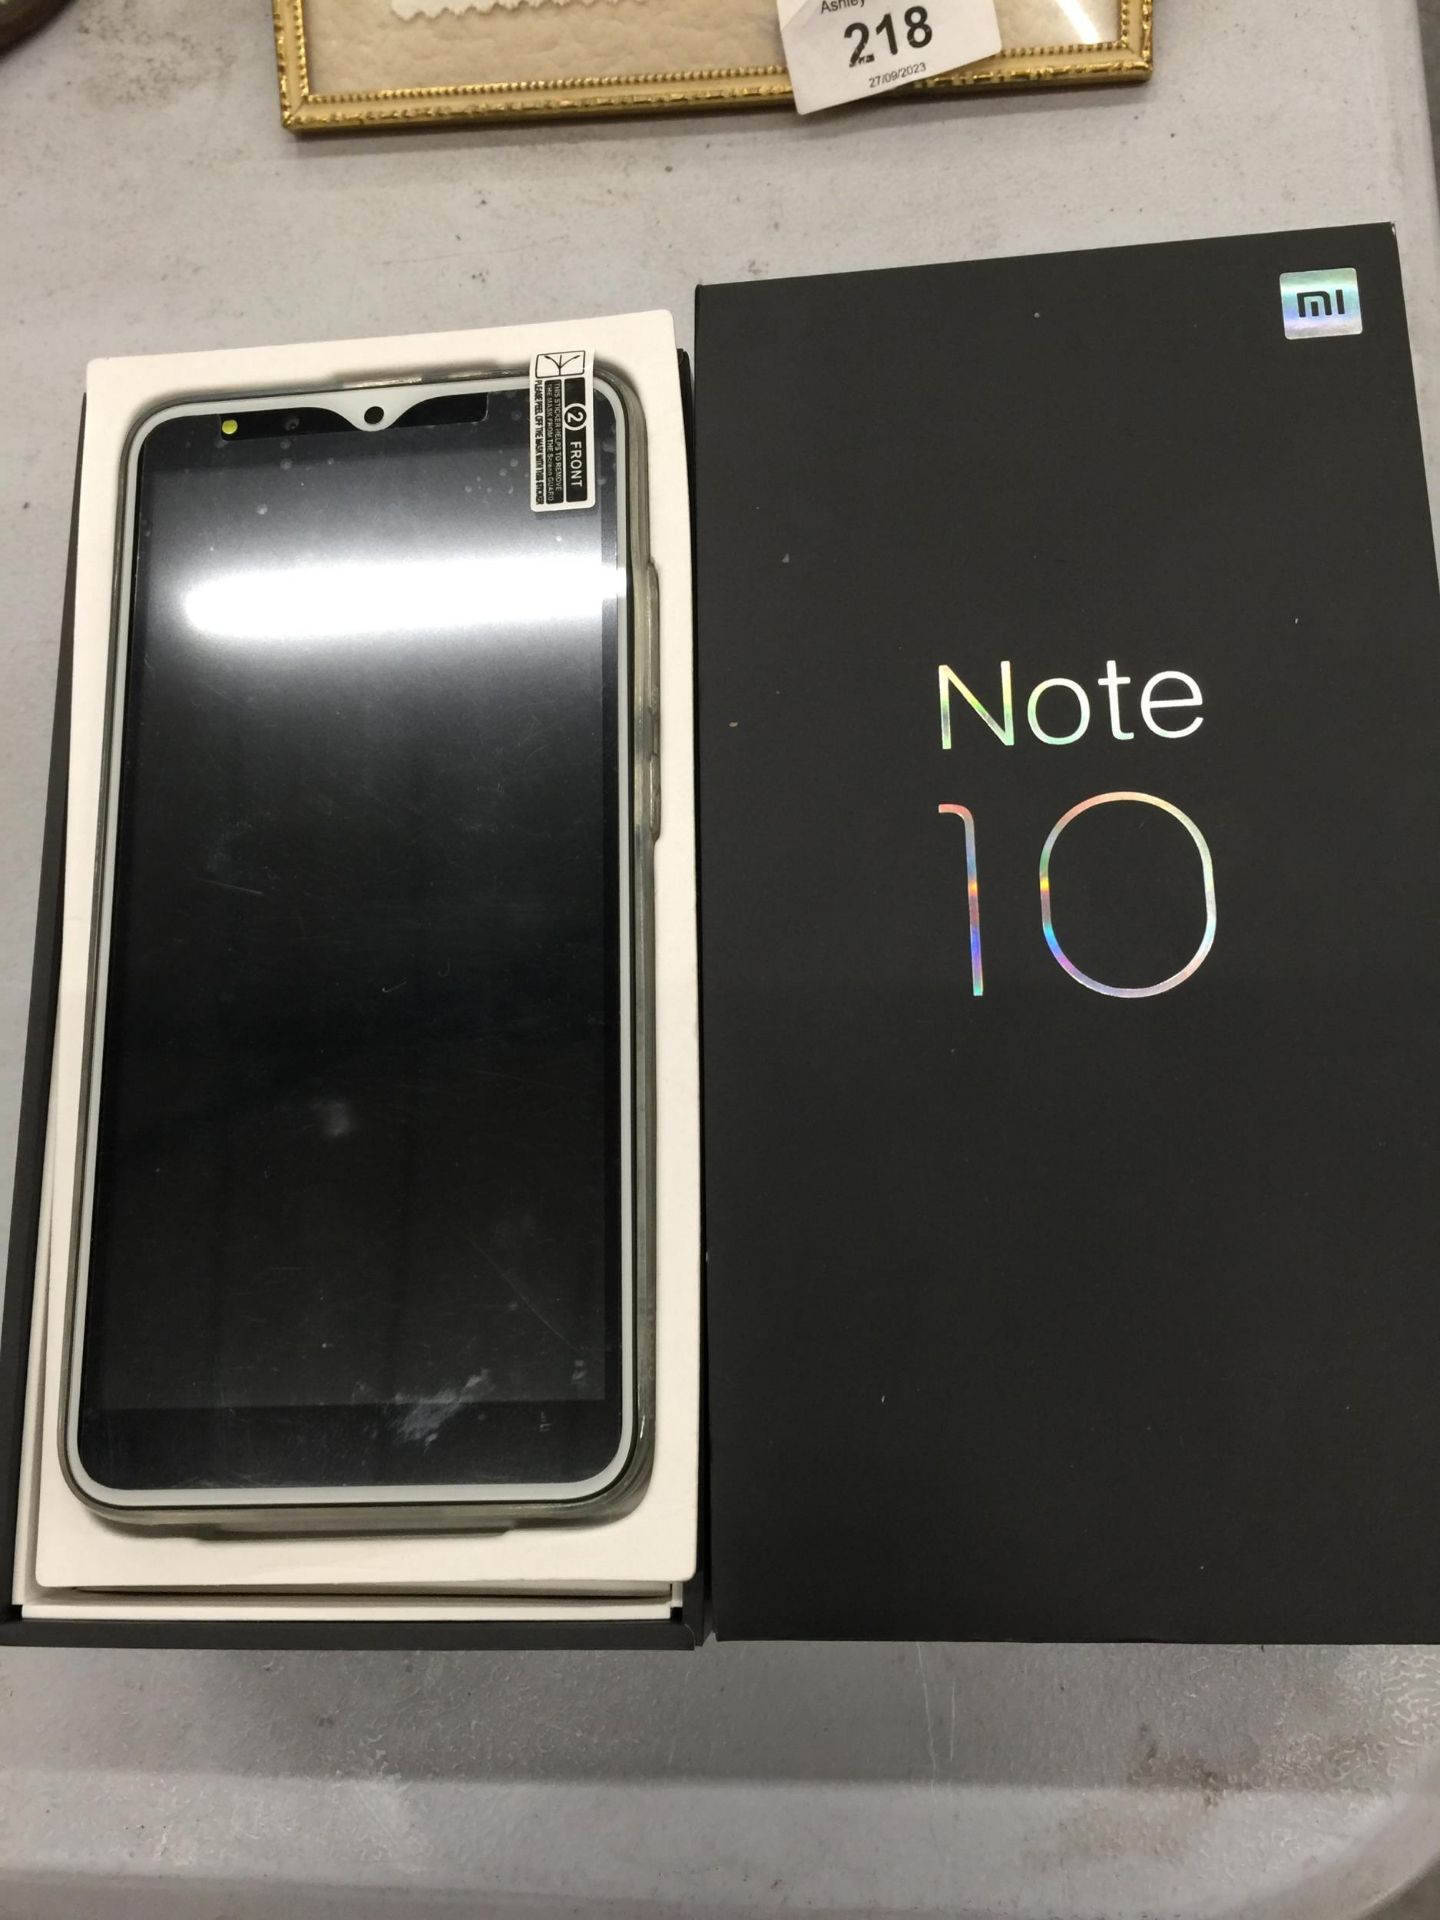 A Mi NOTE 10 MOBILE PHONE IN BOX, UNCHARGED SO CONDITION UNKNOWN